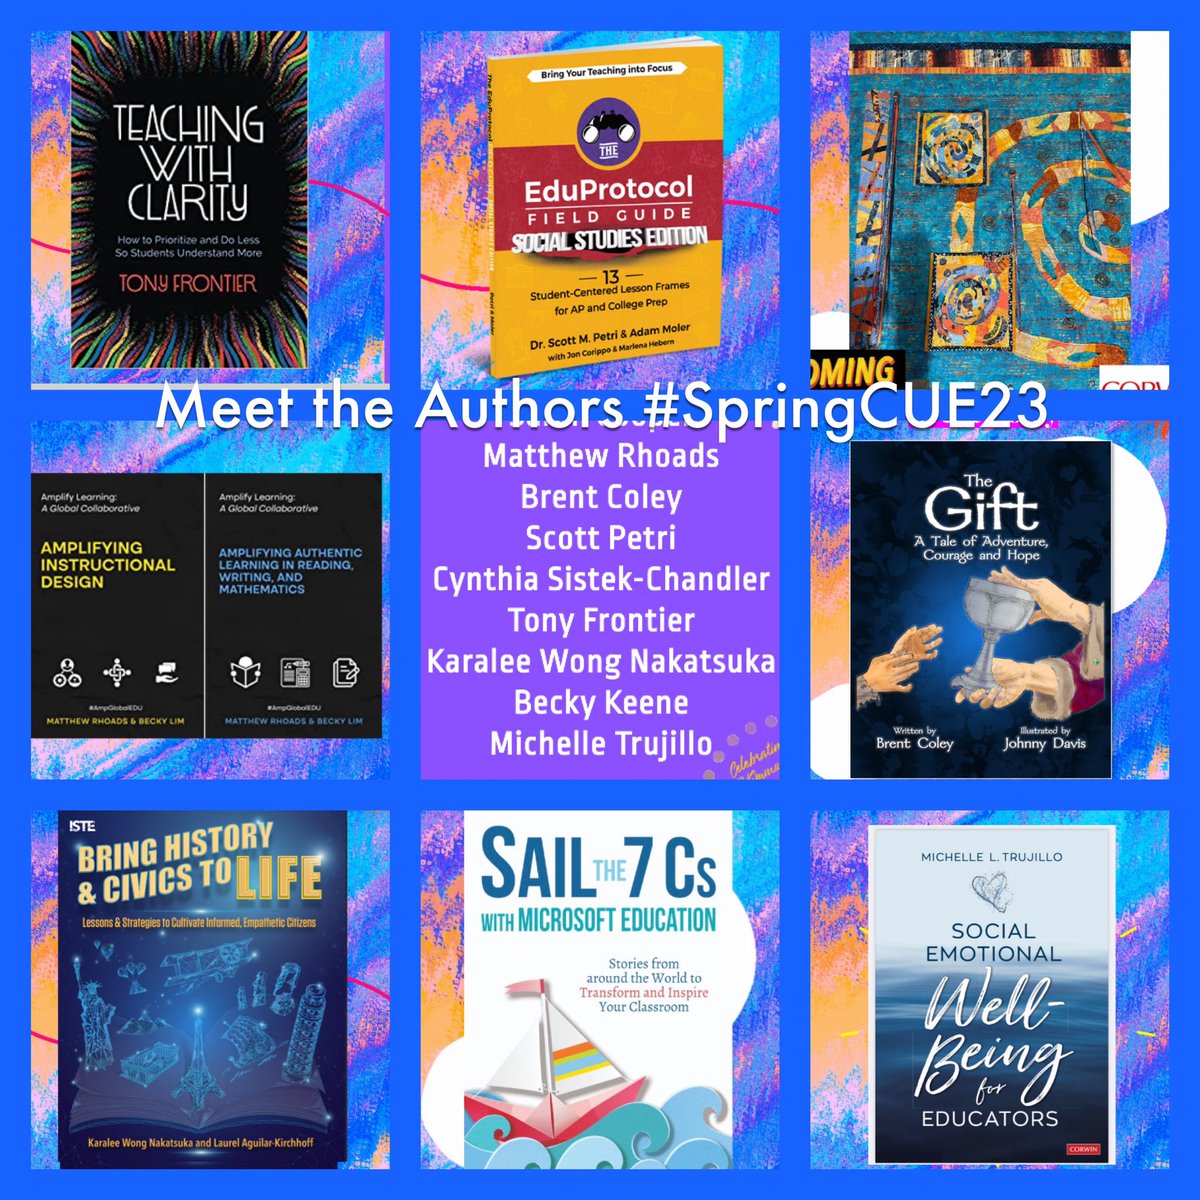 Such a pleasure and honor to participate in @cueinc #SpringCUE Meet the Authors📚 with this distinguished group. Grab your copy of their books today! @brentcoley @BeckyKeene @cmurilloteach @scottmpetri @tonyfrontier @LucyKirchh @CynthiaSistek @MattRhoads1990 @JoeMarquez70 📗📘📙